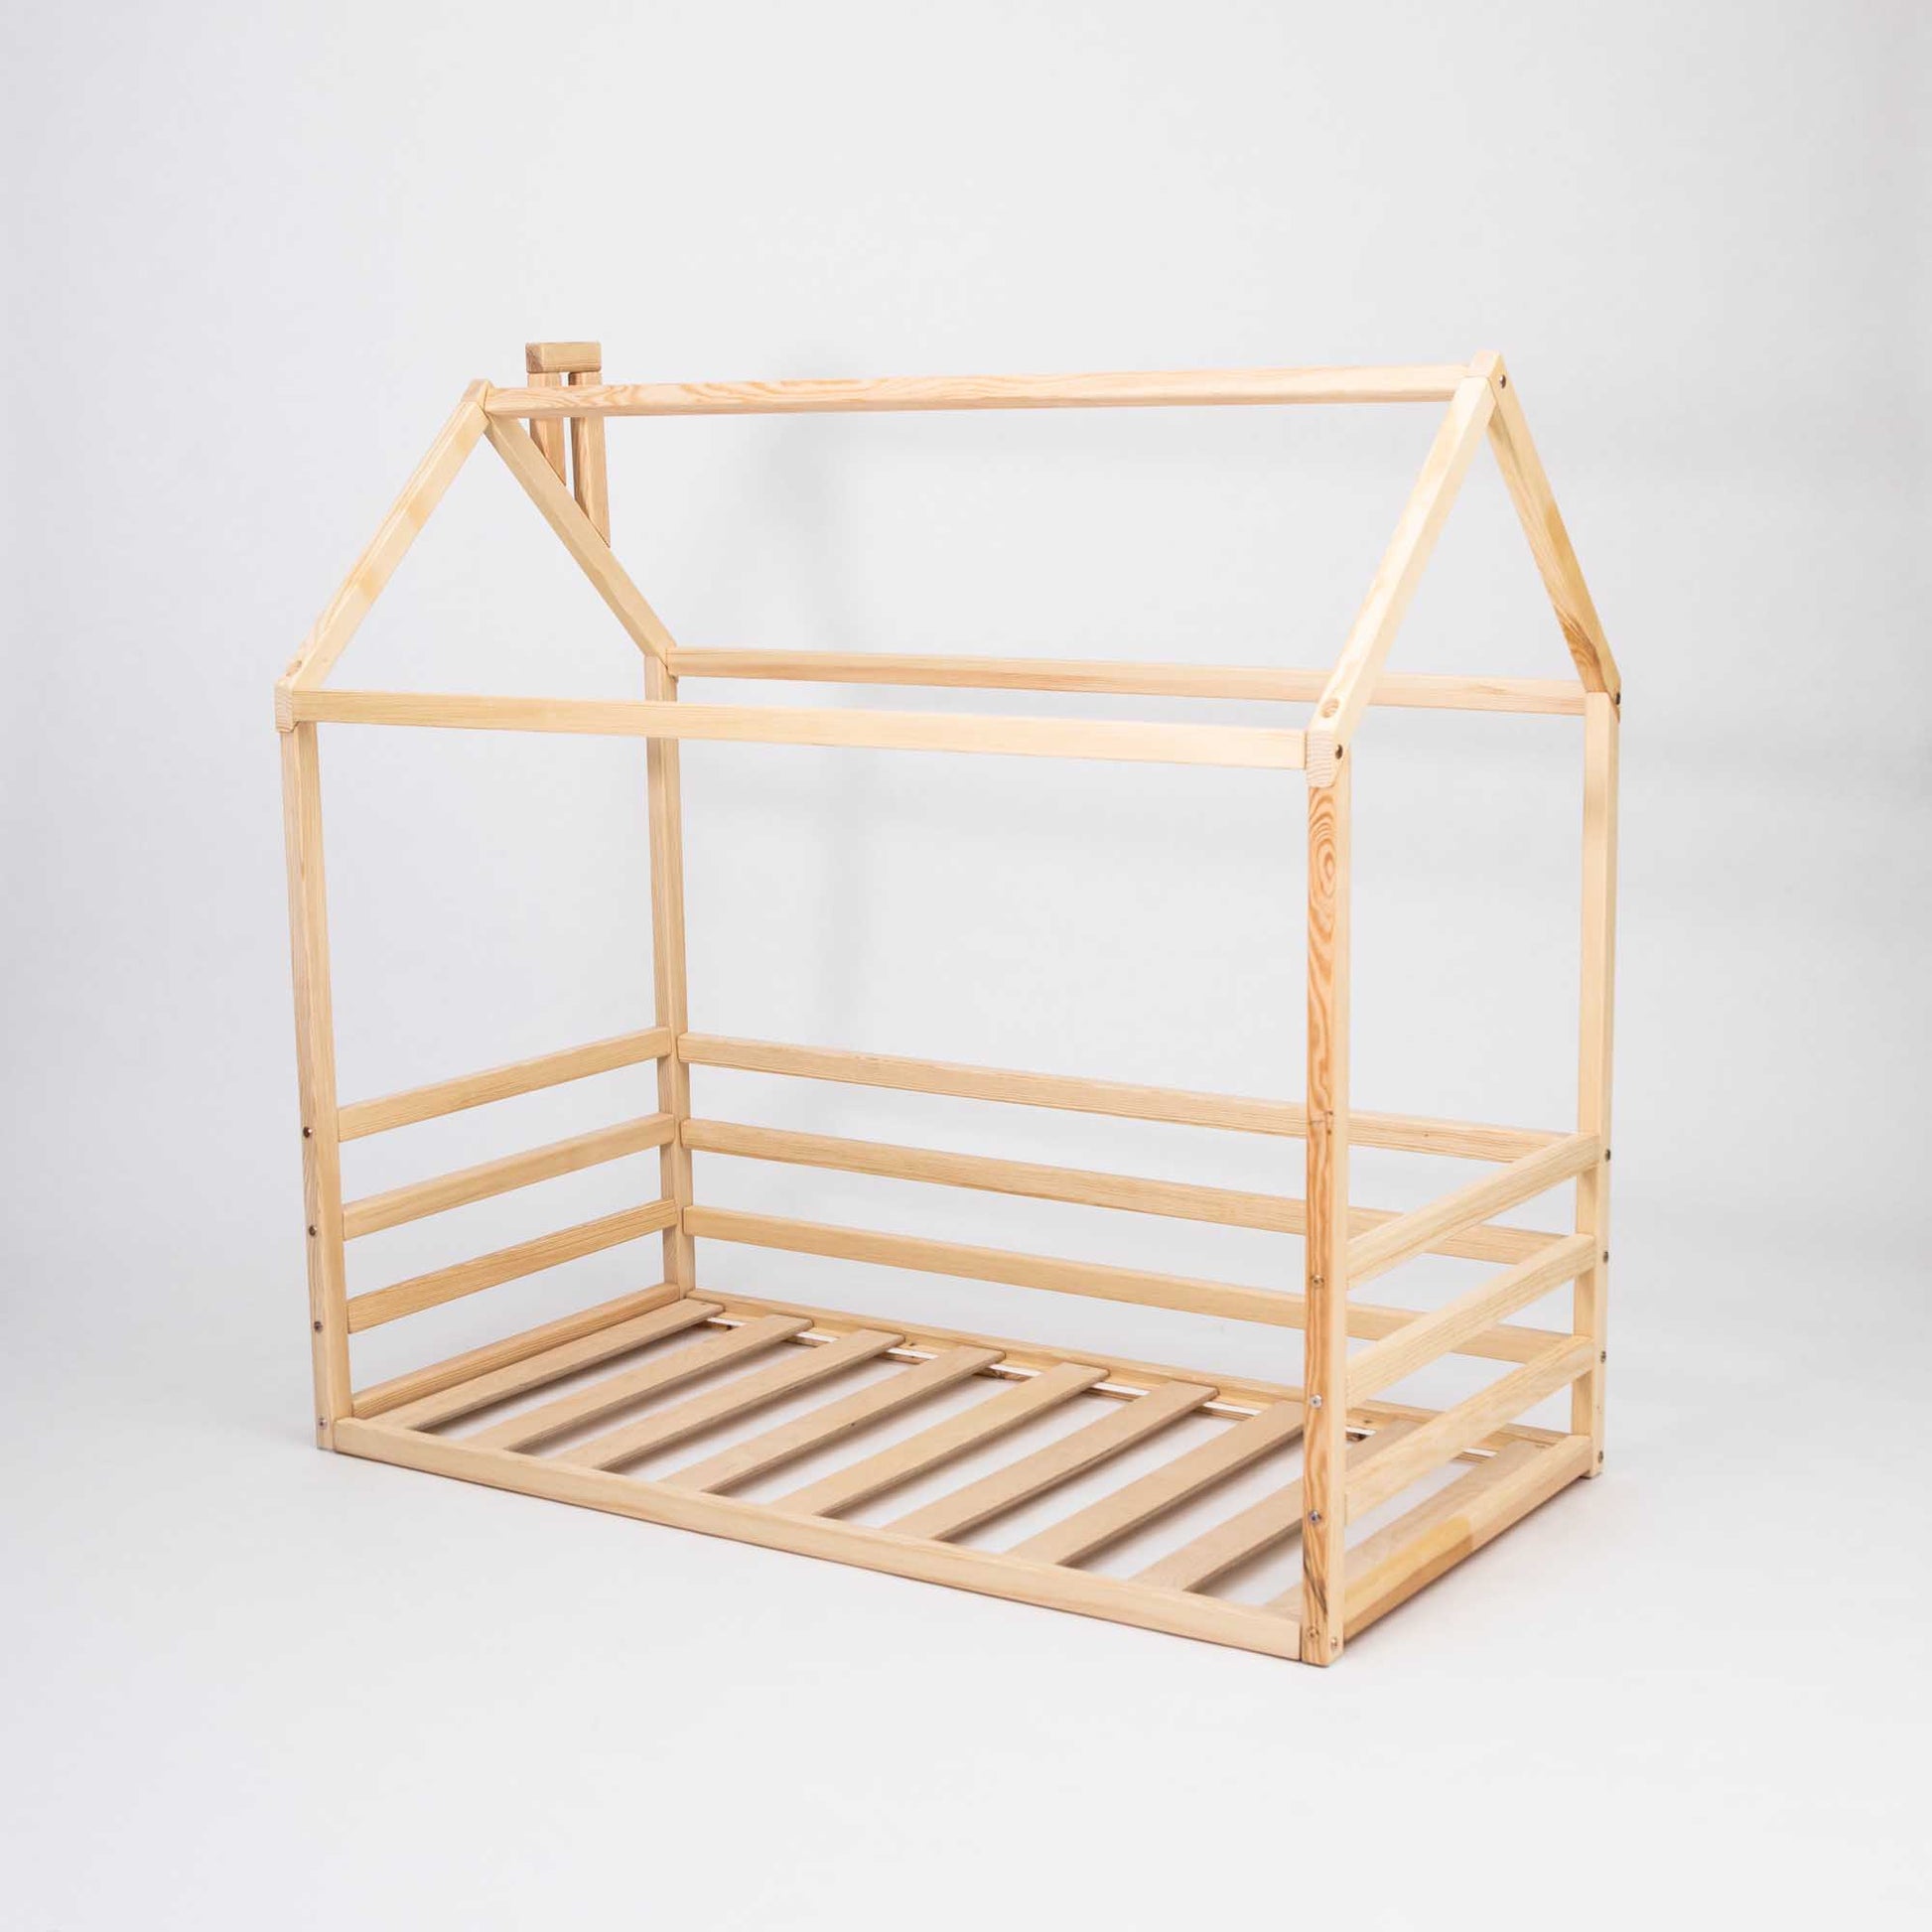 A Kids' house-frame bed with 3-sided horizontal rails, perfect for toddlers and kids who prefer a floor level sleeping option.